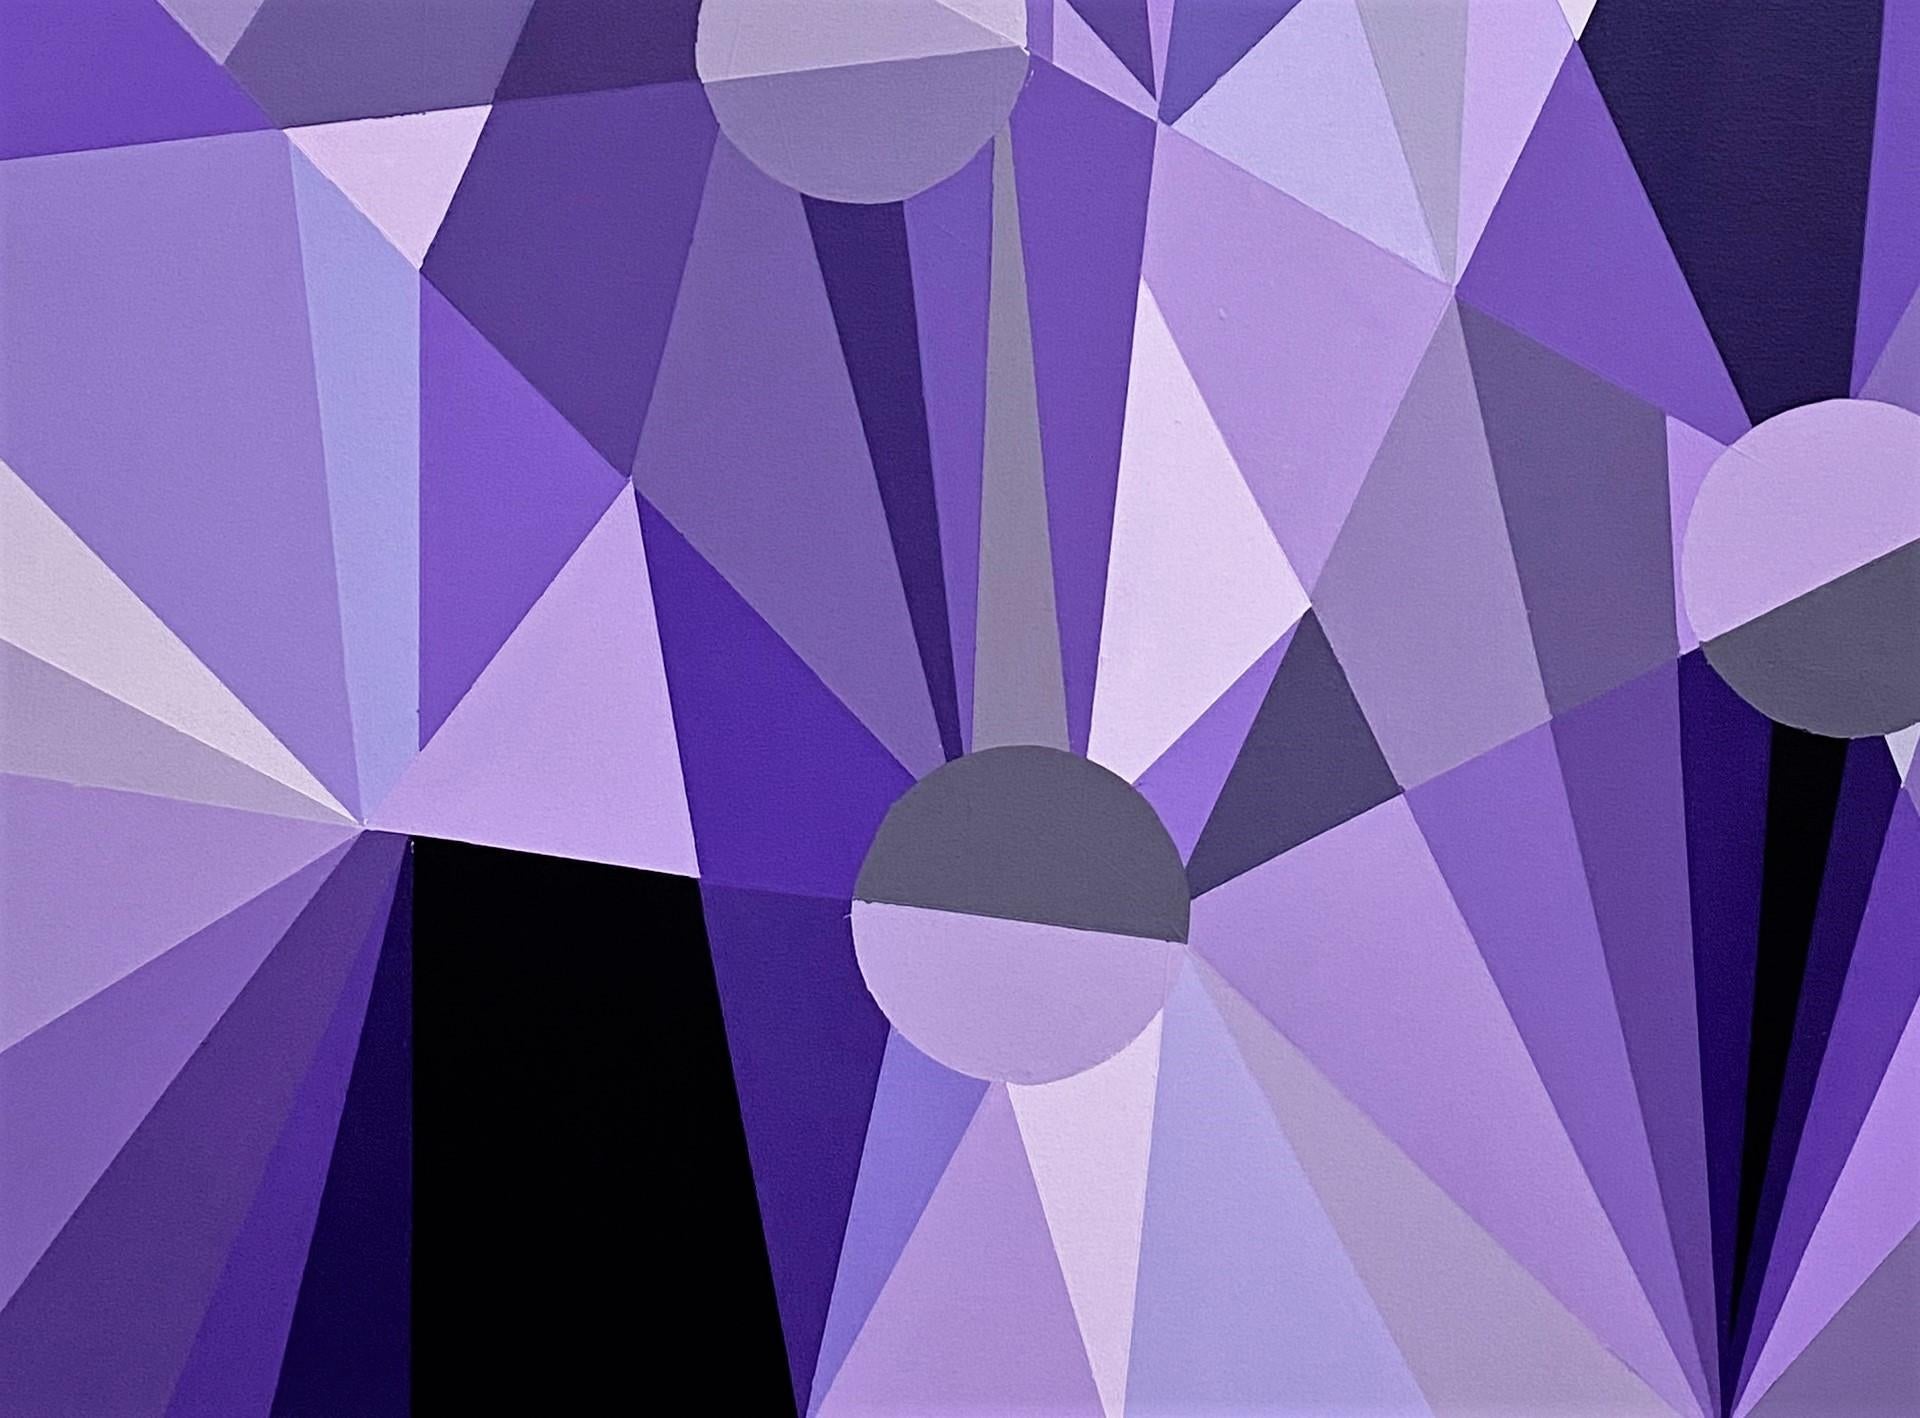 “Drops of Amethyst”
30 inches x 30 inches
Amethyst Coated Acrylic Paint in Resin Pour on Canvas

Geometric abstract painting combining shades of violet and gray by artist Edward Granger. Sharp shapes are contrasted by five circles in the painting.